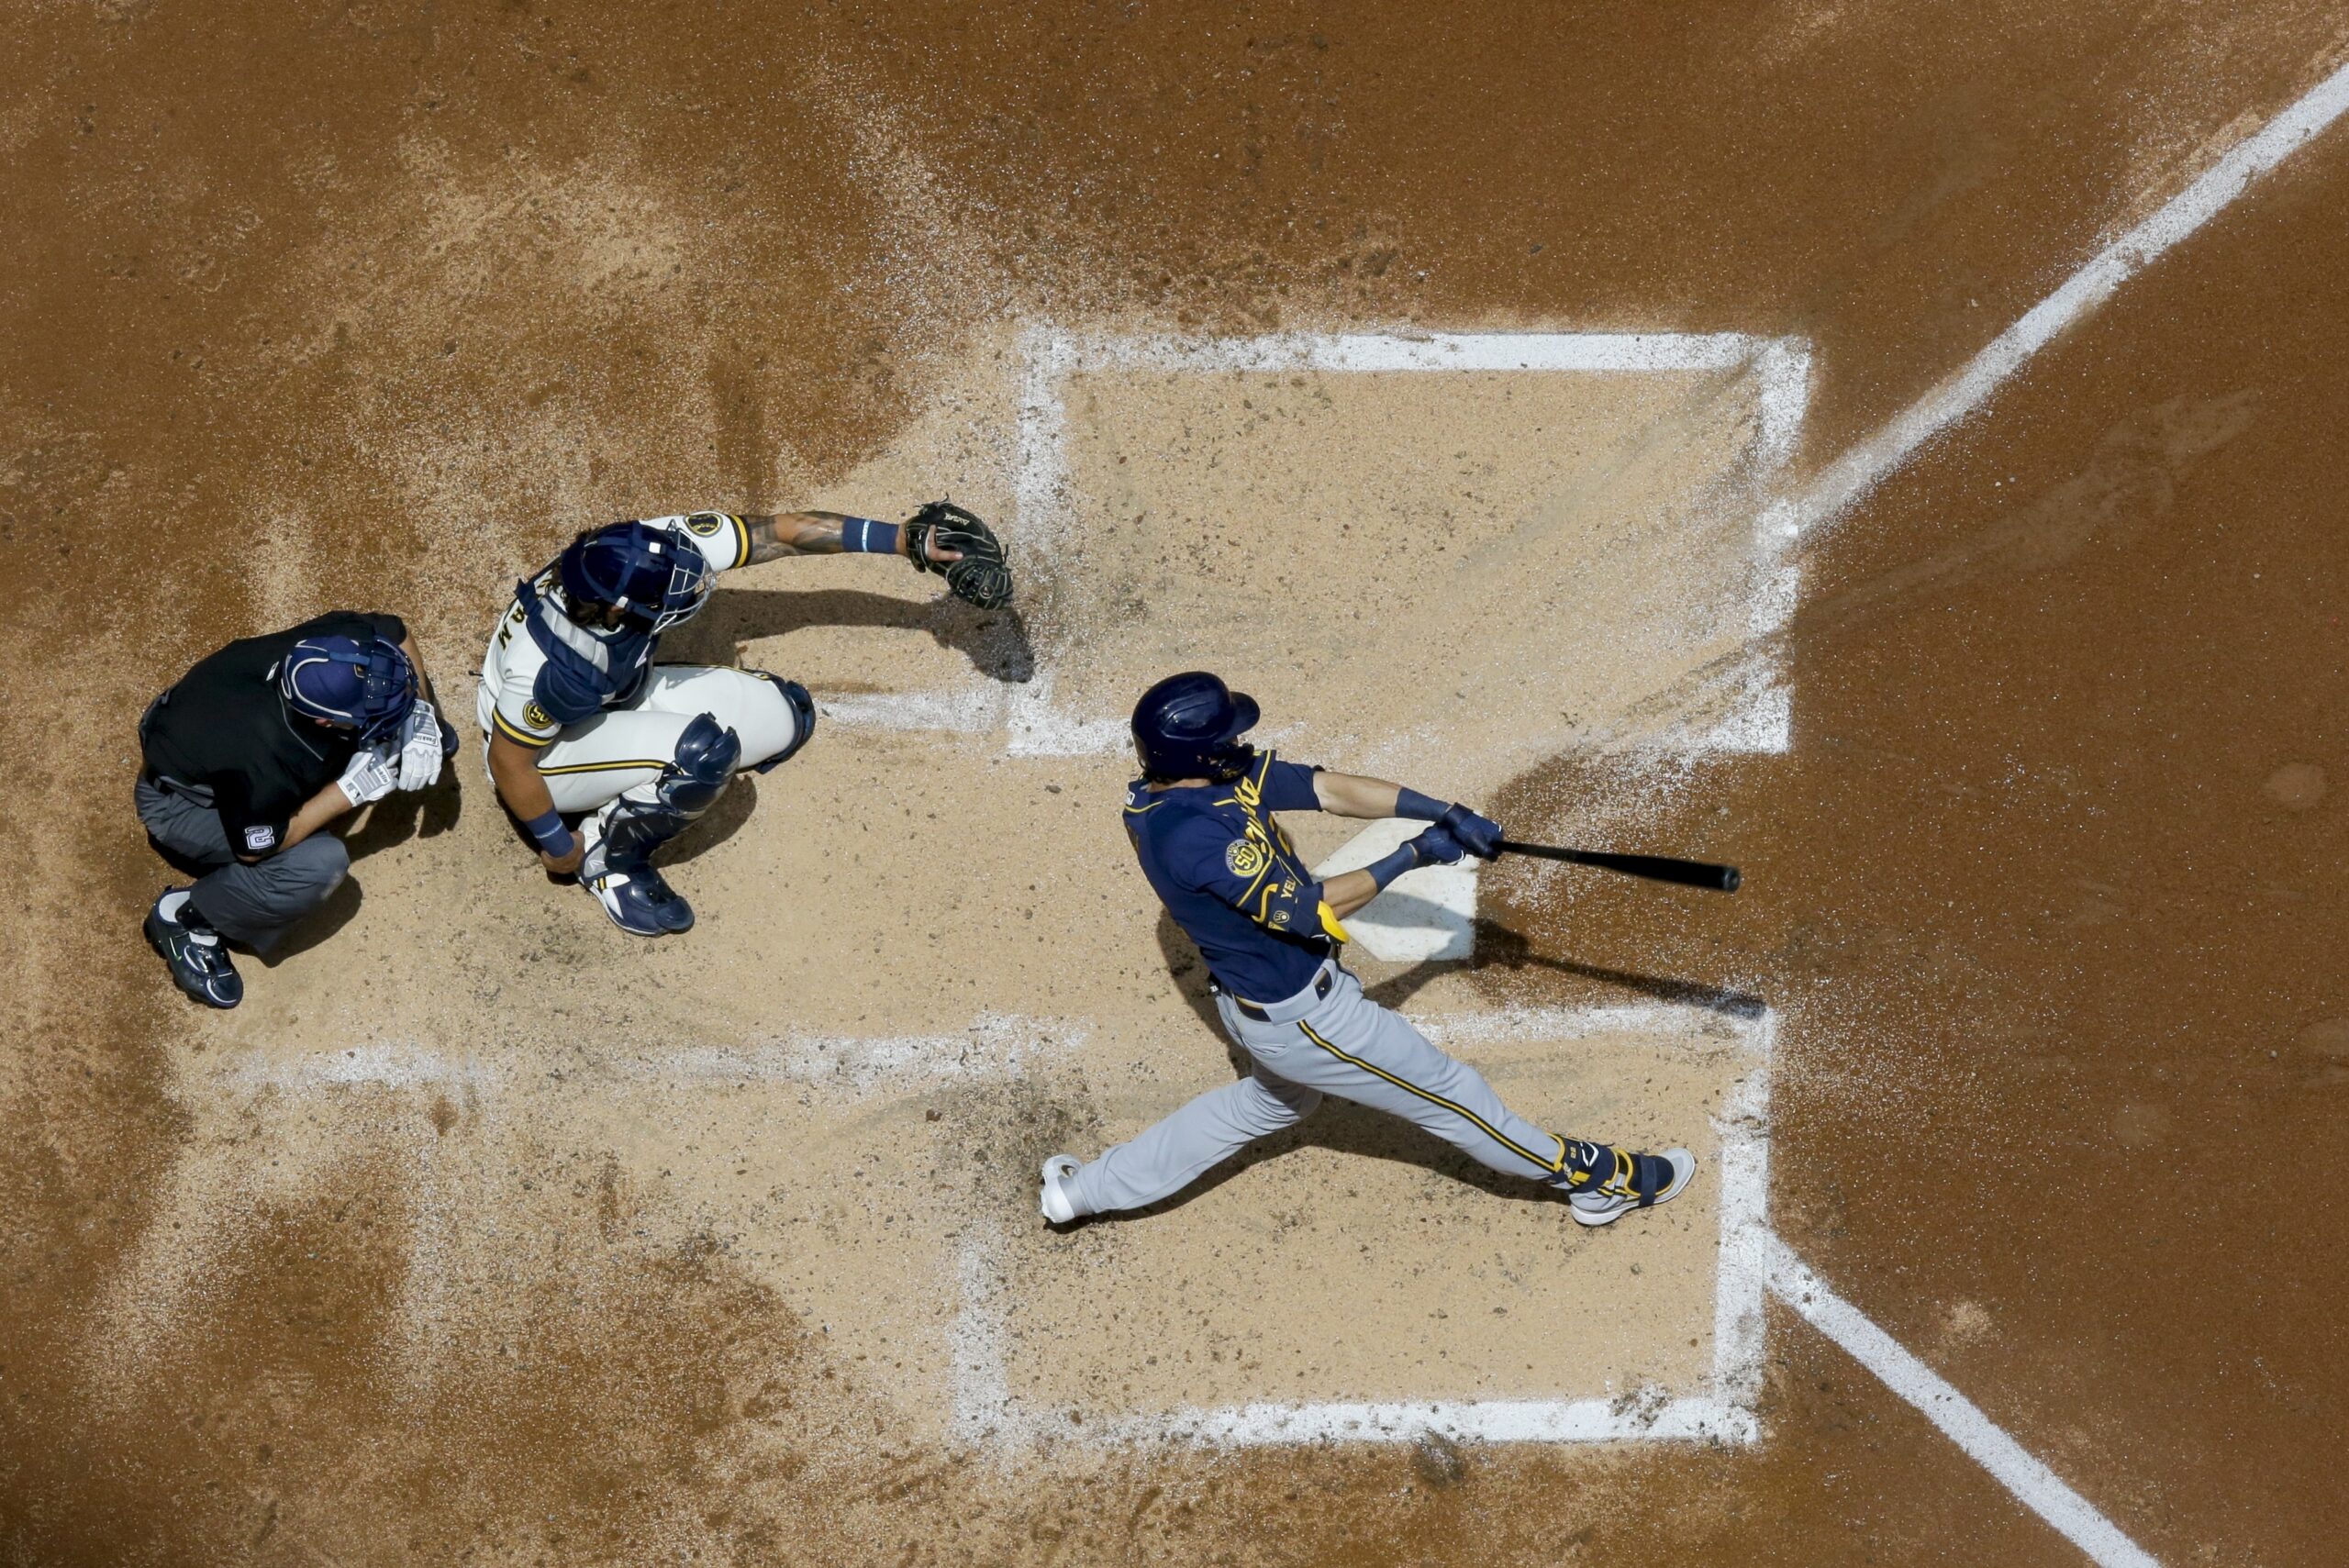 Baseball Is Back: Here’s How The 2020 Season Will Look Different For The Brewers